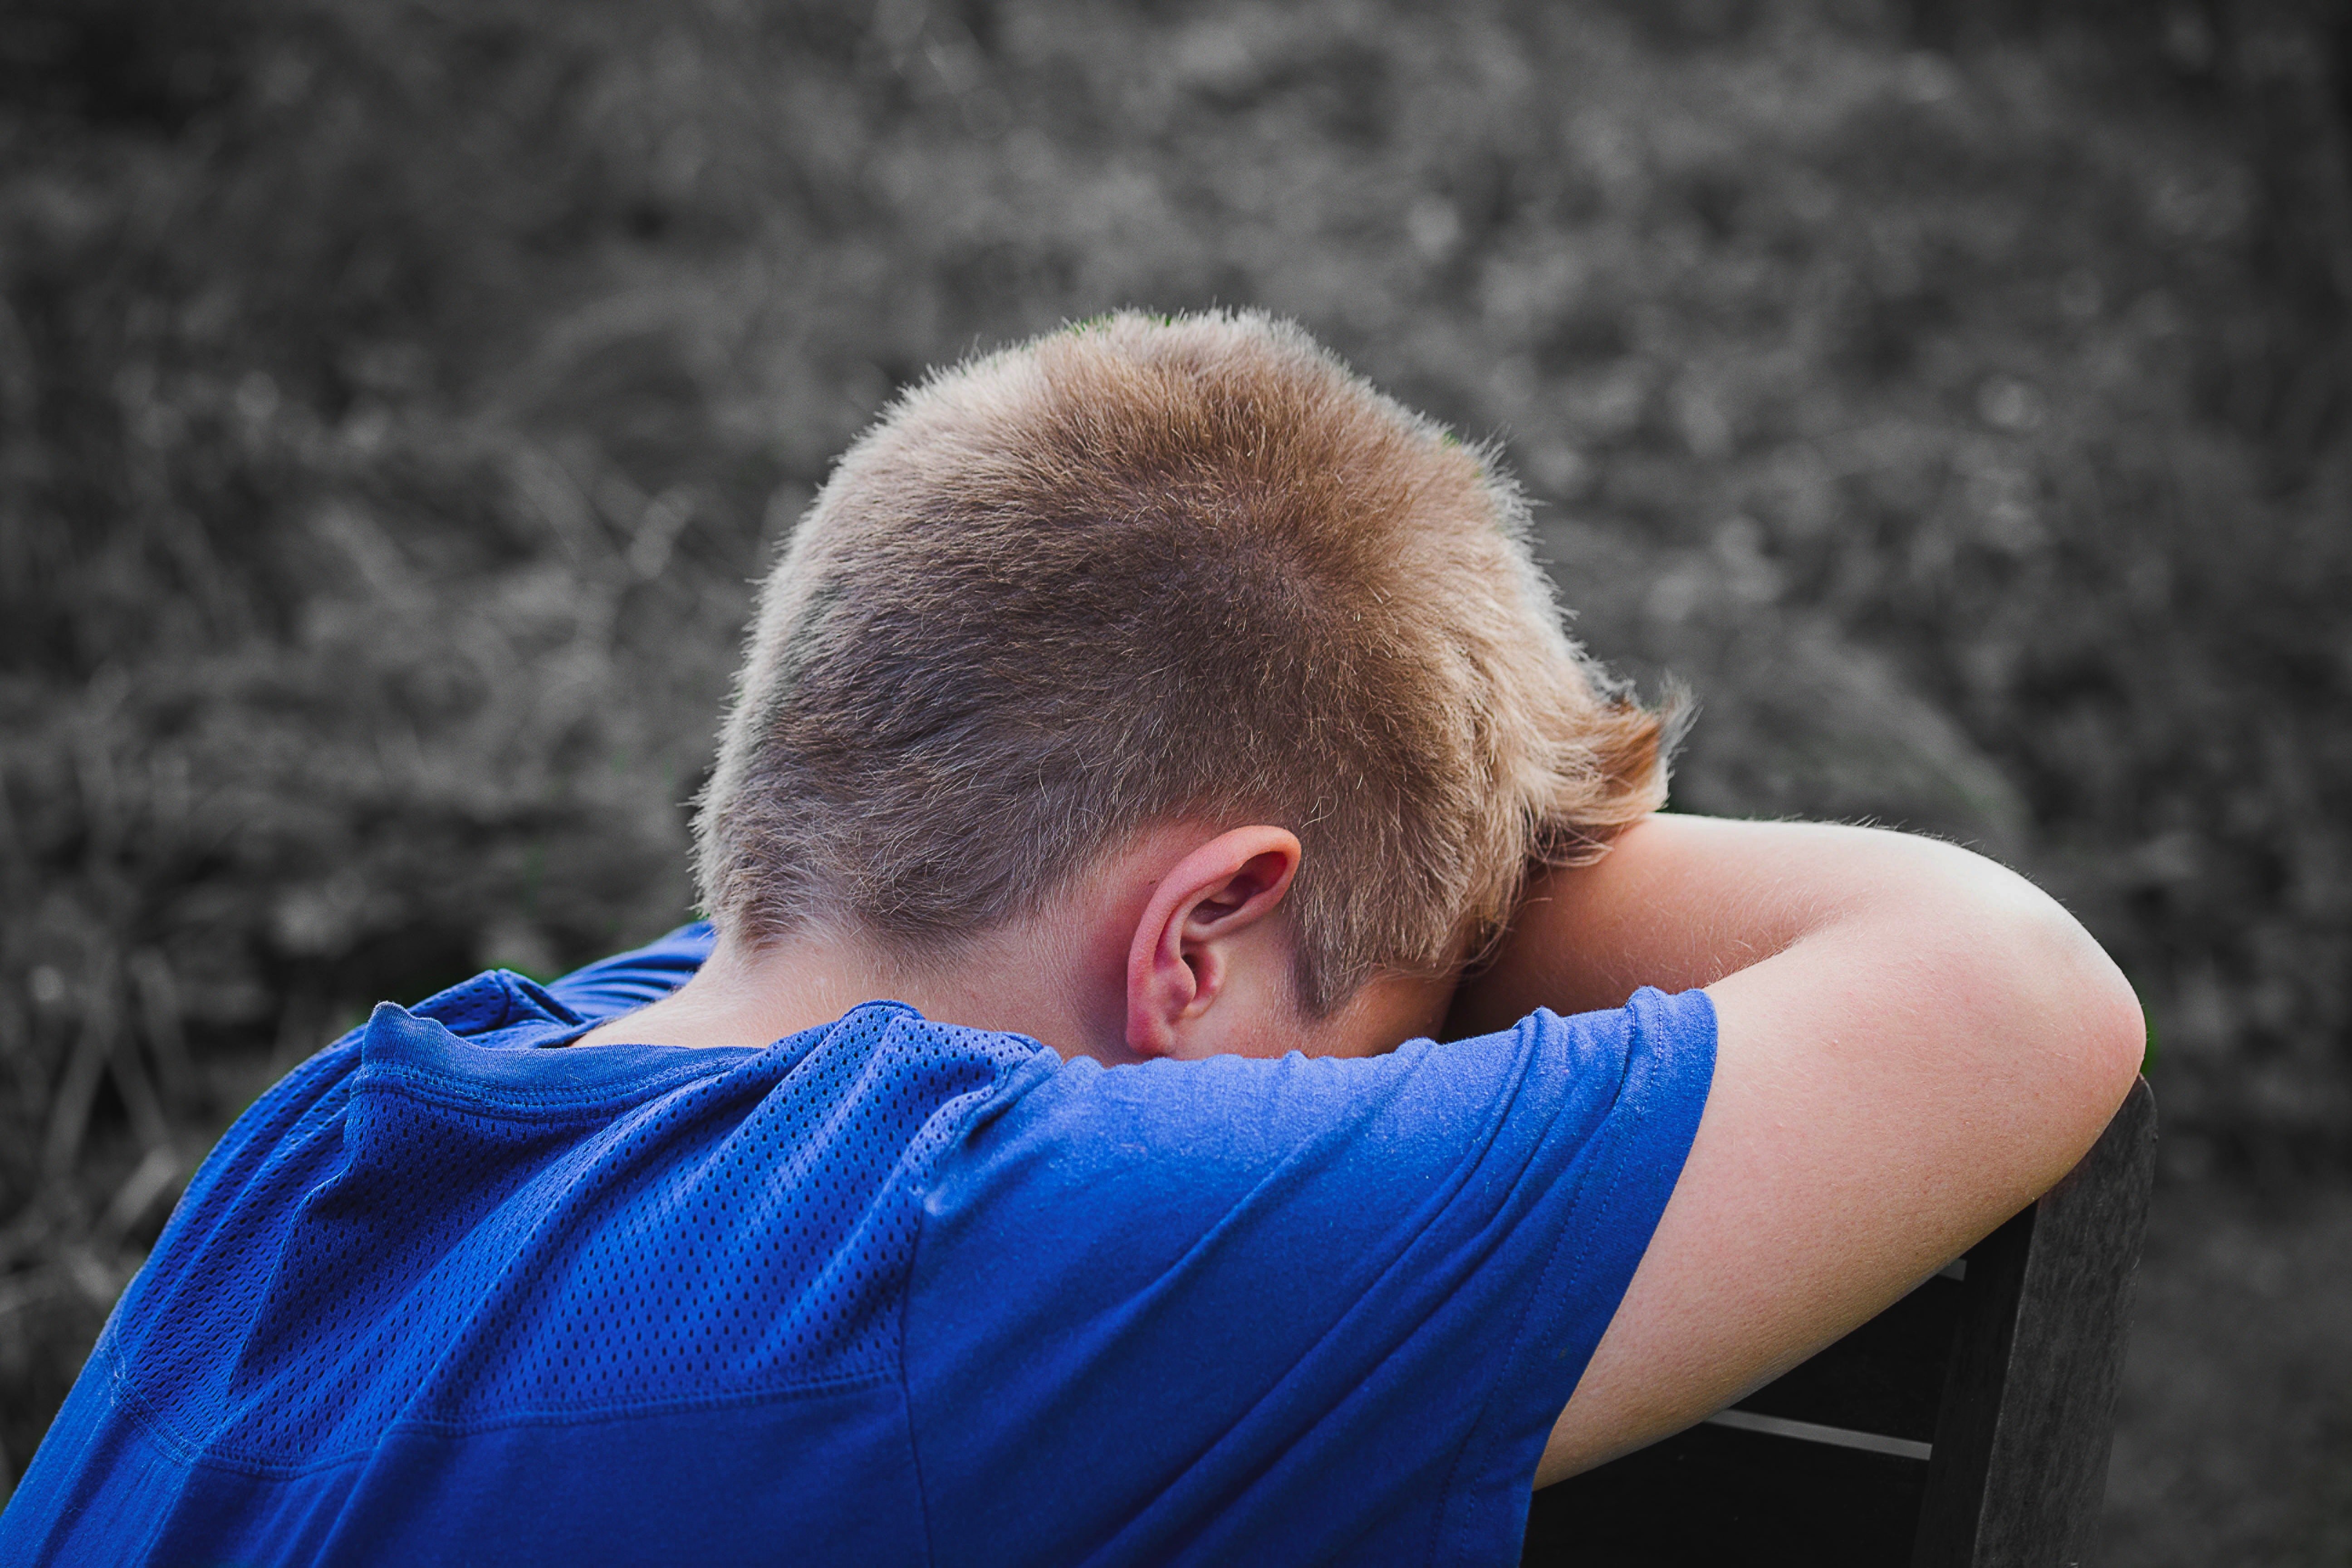 The boy was crying inconsolably | Photo: Pexels